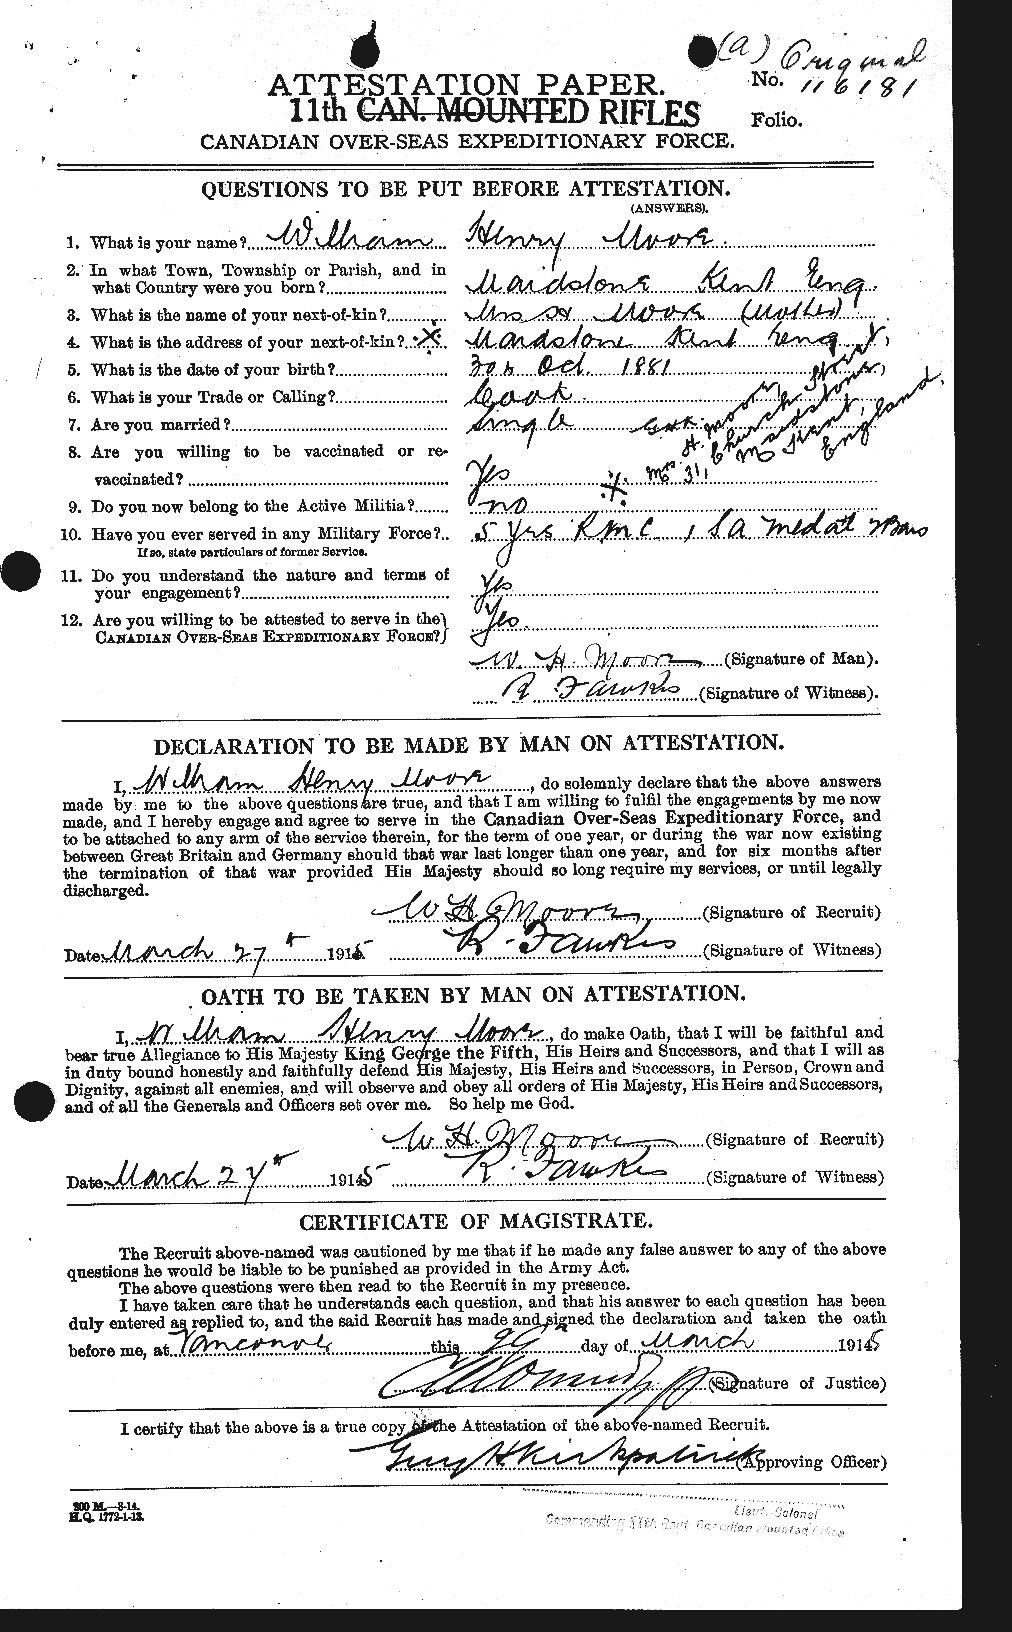 Personnel Records of the First World War - CEF 505827a